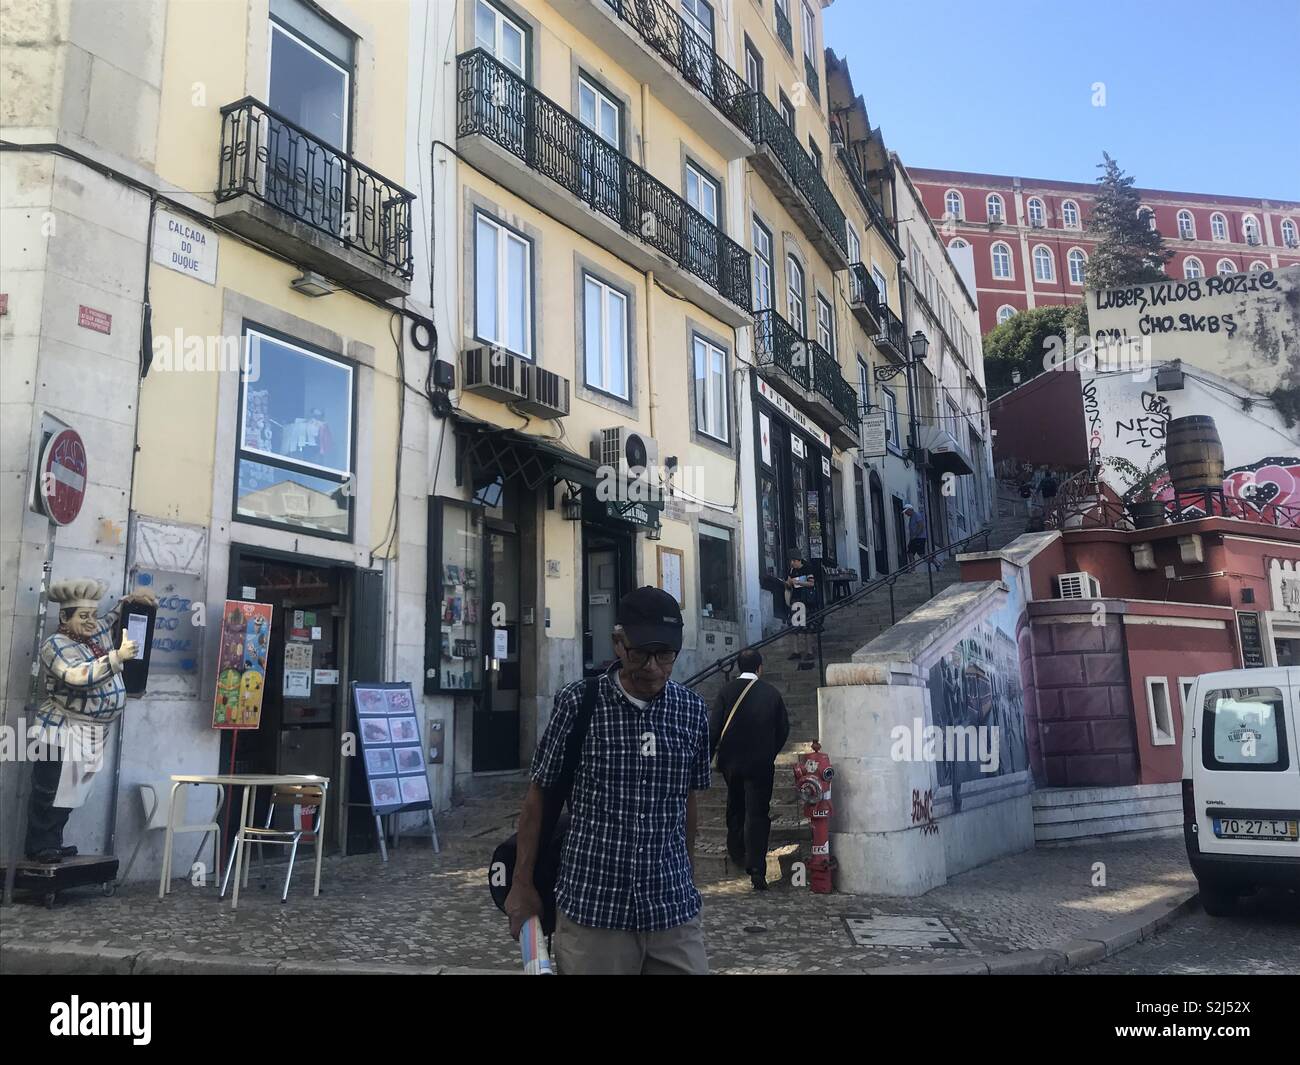 A street in Lisbon, Portugal Stock Photo